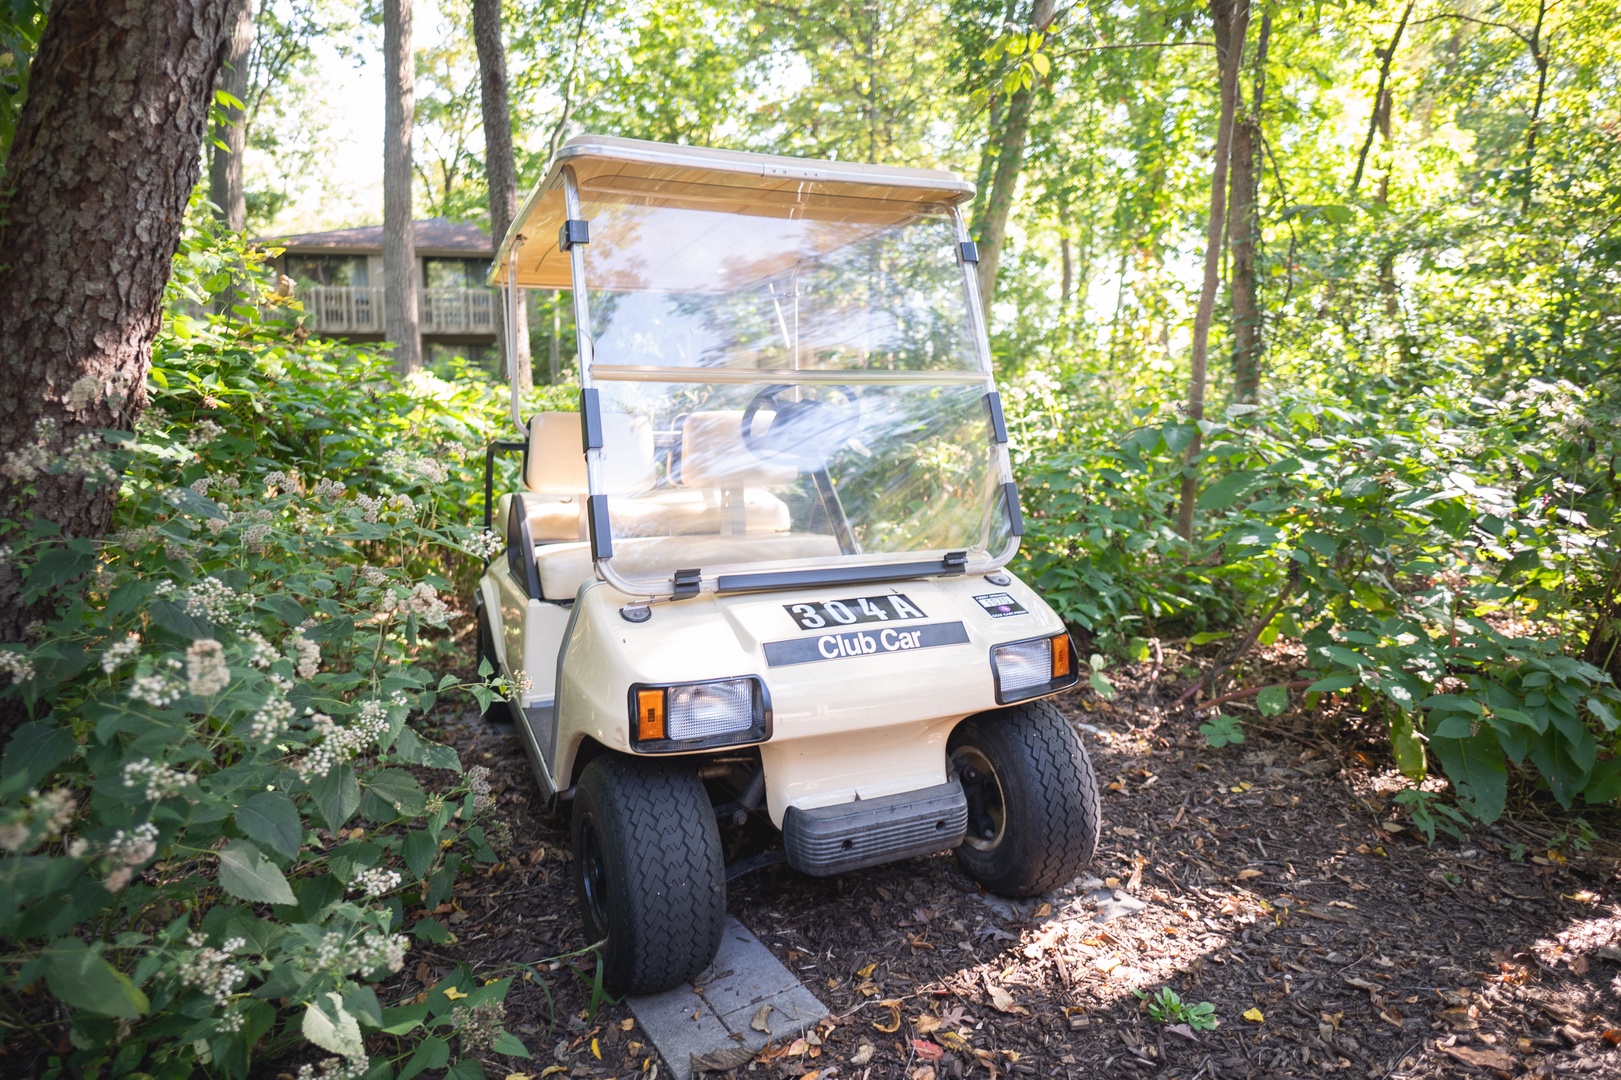 Enjoy buzzing around the community in your own included golf cart!